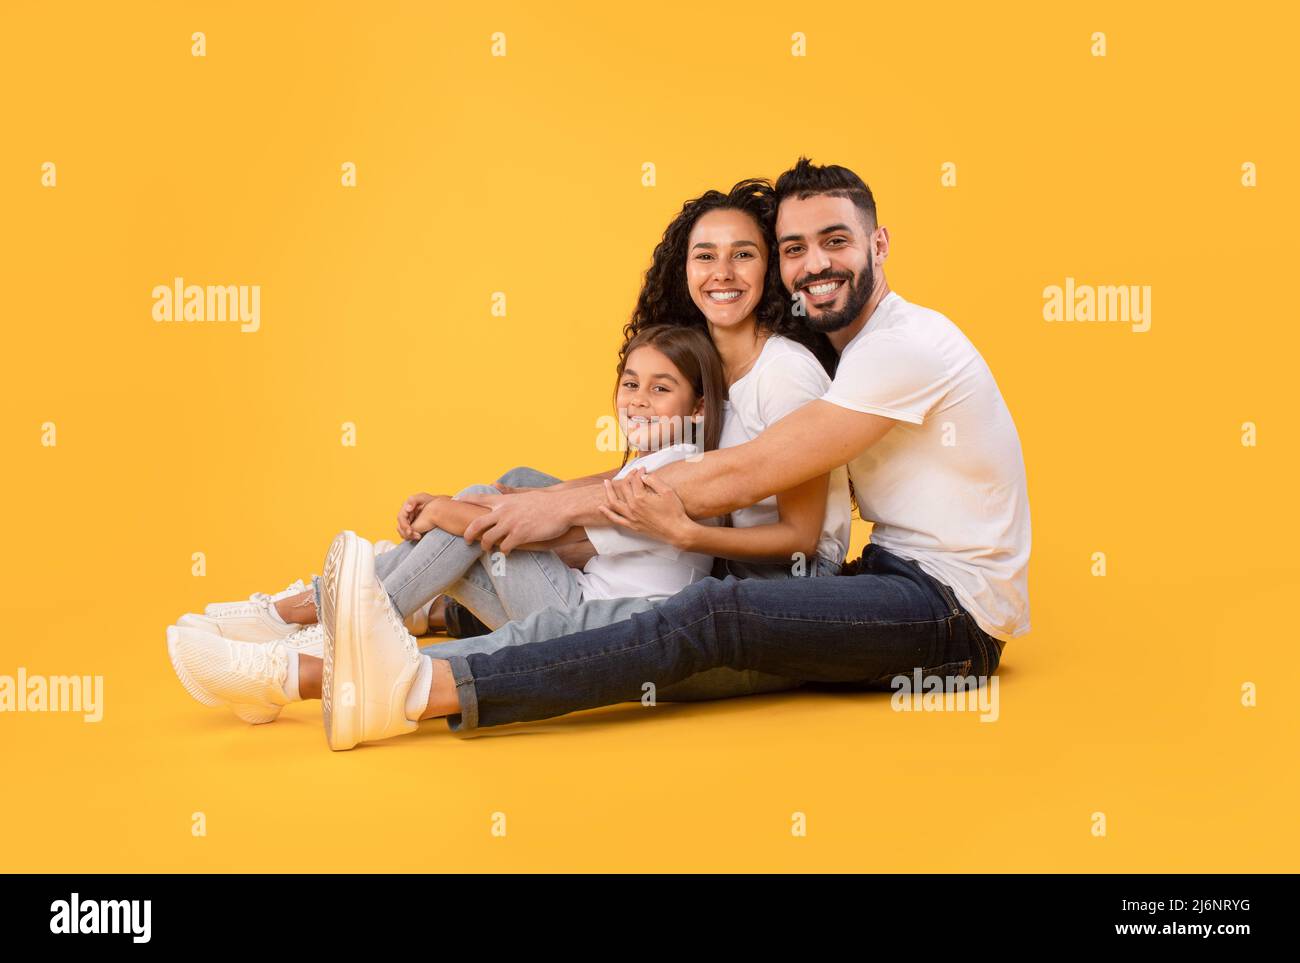 Arabic Family Of Three Embracing Together Sitting Over Yellow Background Stock Photo